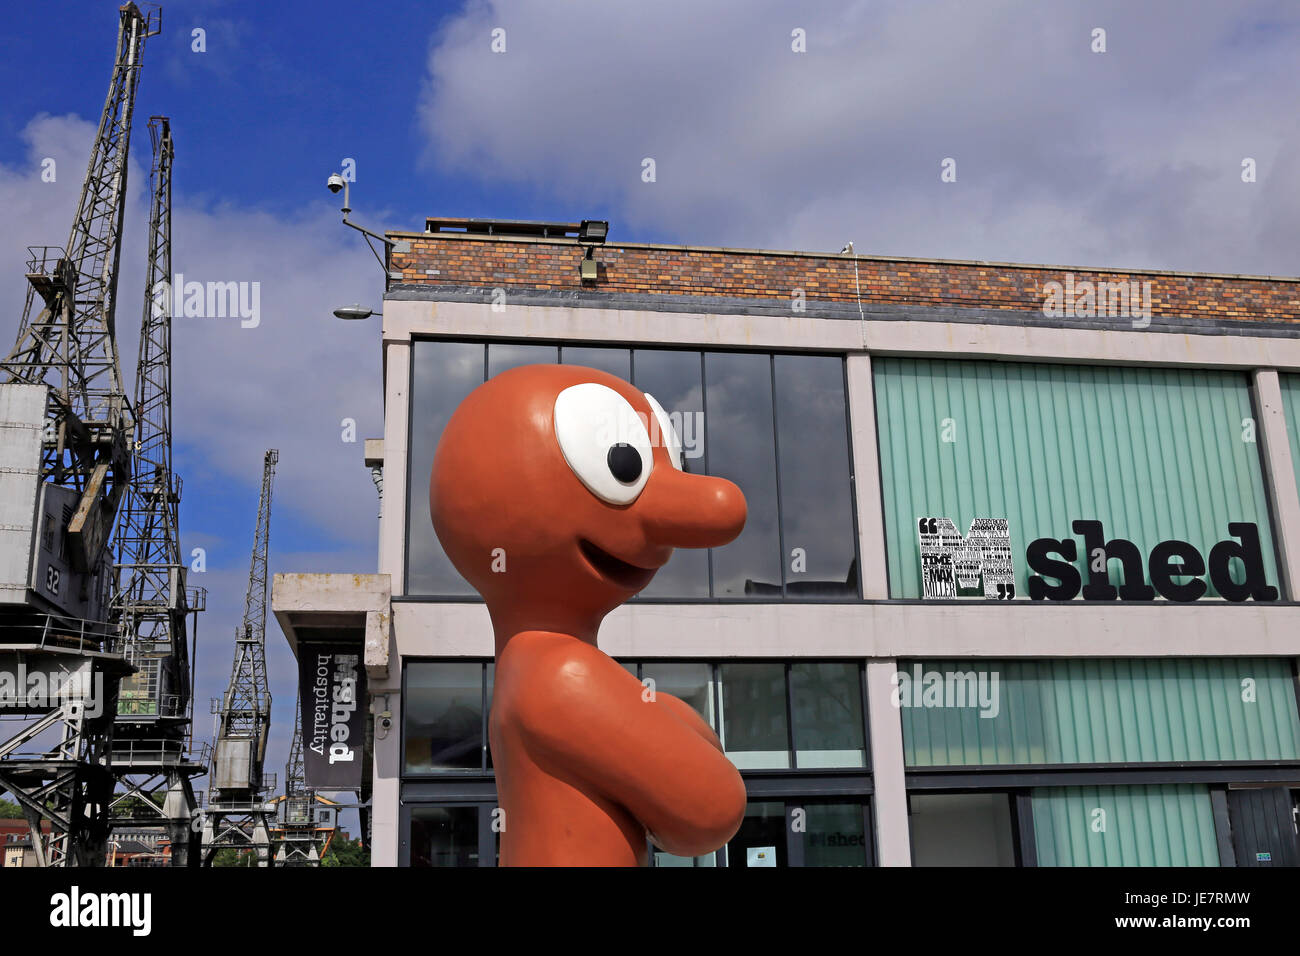 Bristol, UK. 22nd June, 2017. A statue of cartoon character Morph stands  outside M Shed museum on the city's harbourside. Morph first appeared on  television in 1977 and as part of his